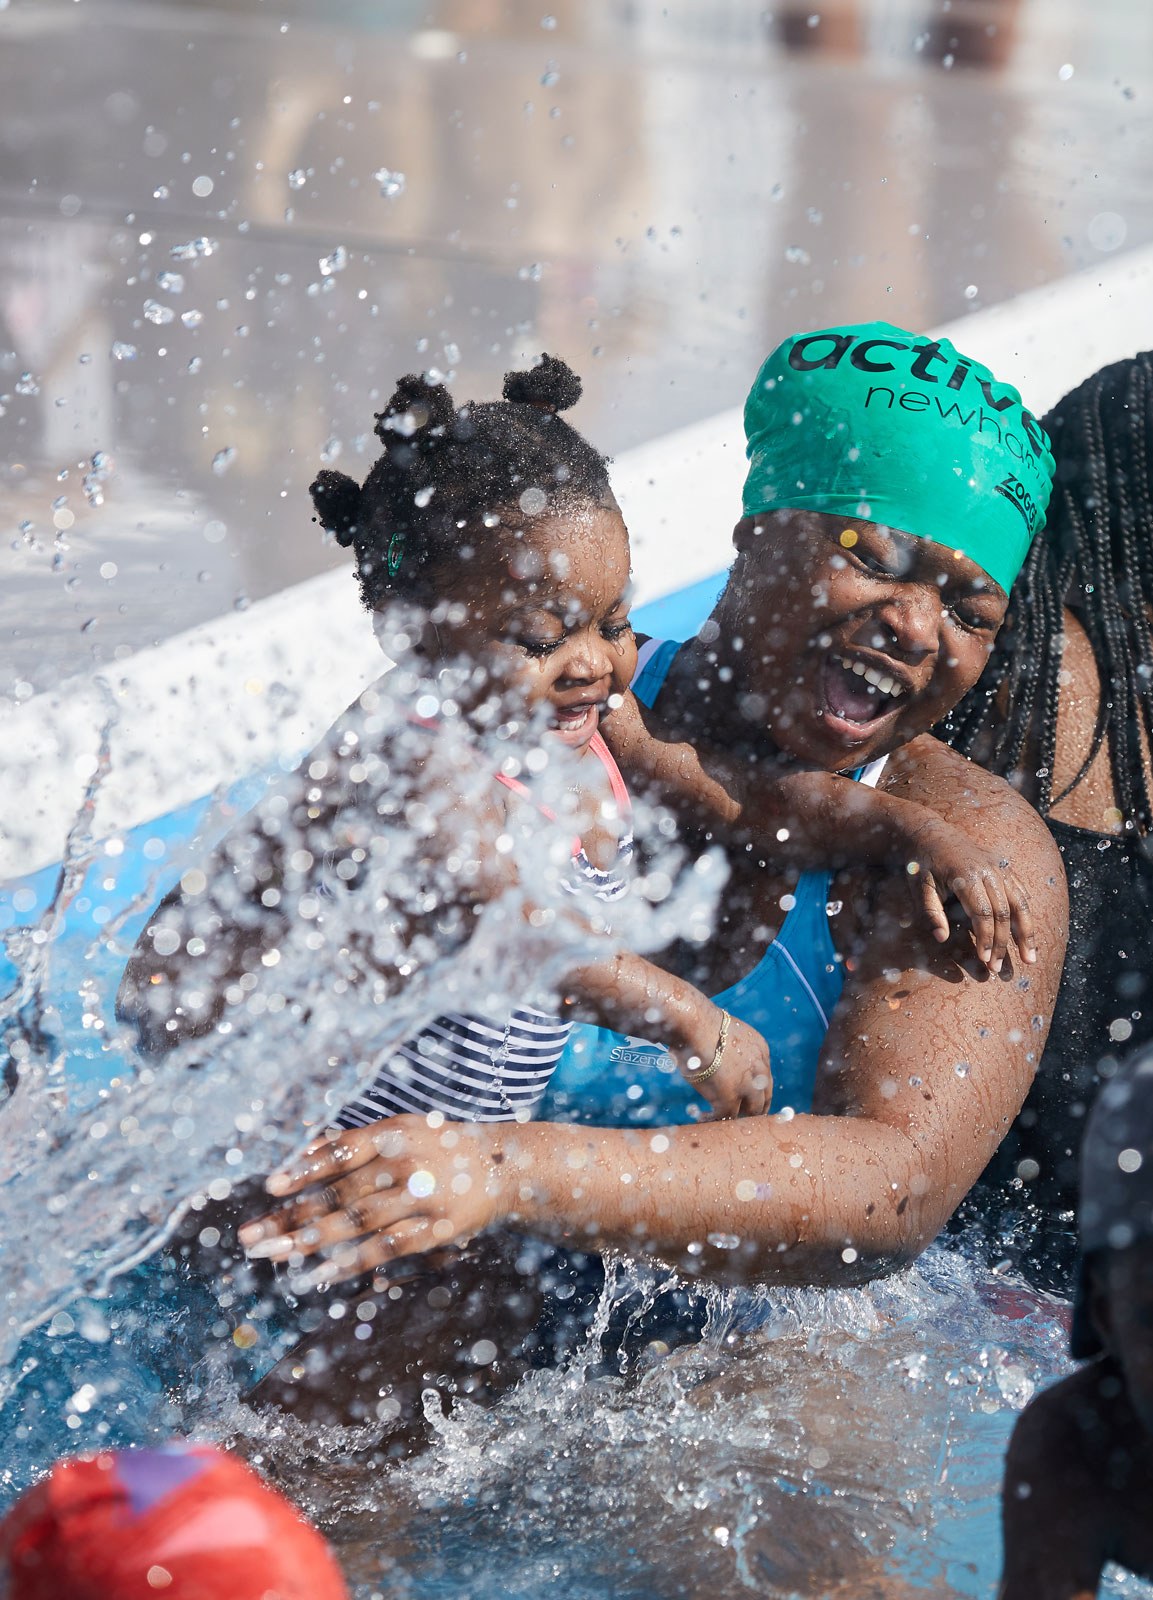 A woman with a child in swimwear, laughing while caught in a splash